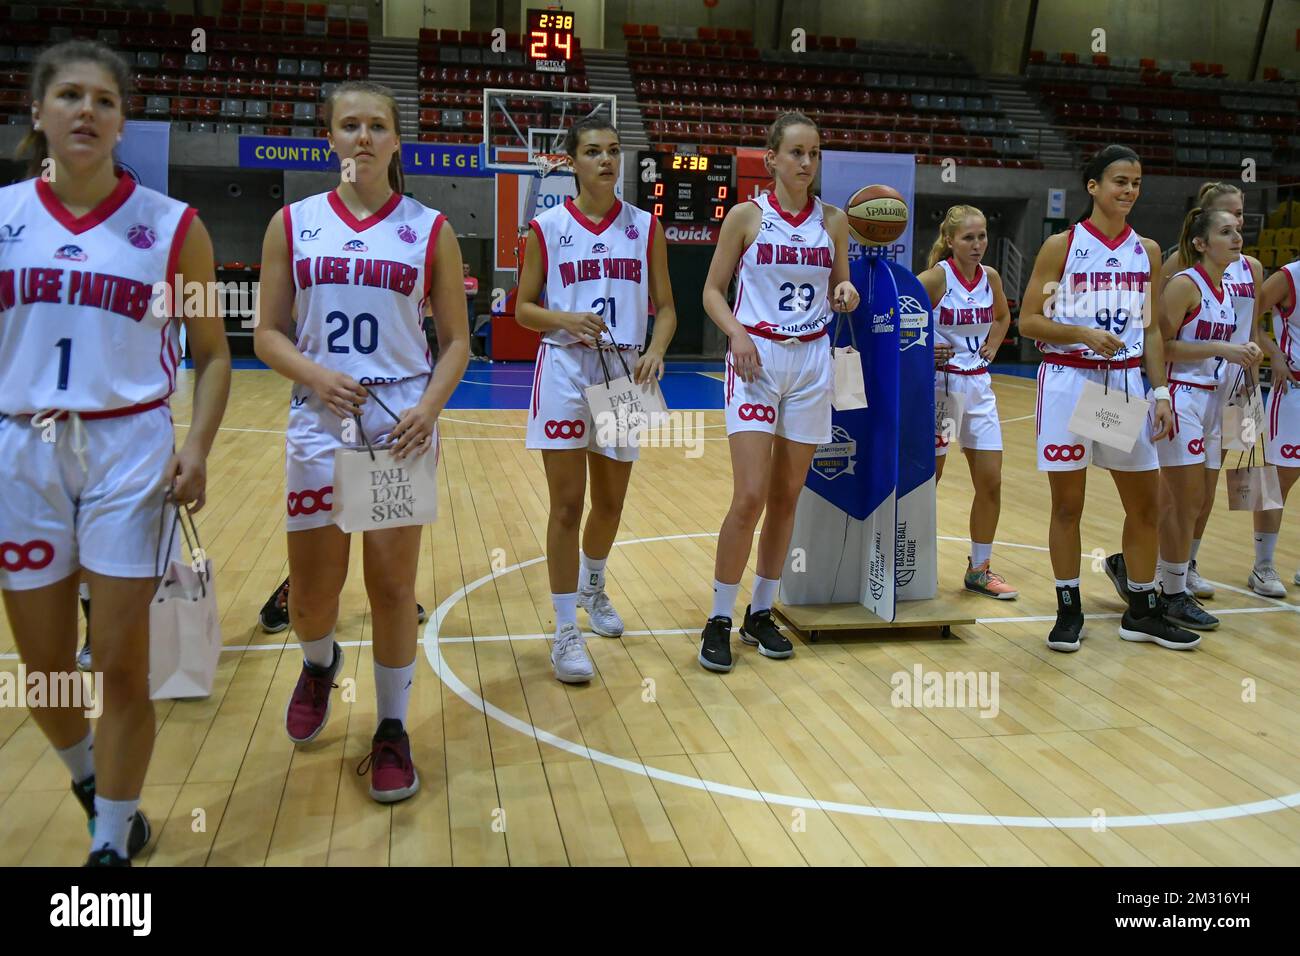 VOO Liege Panthers players pictured before a basketball match between VOO  Liege Panthers and BCF Elfic Fribourg, on the gameday 2, group J of the EuroCup  Women, Wednesday 23 October 2019, Liege,